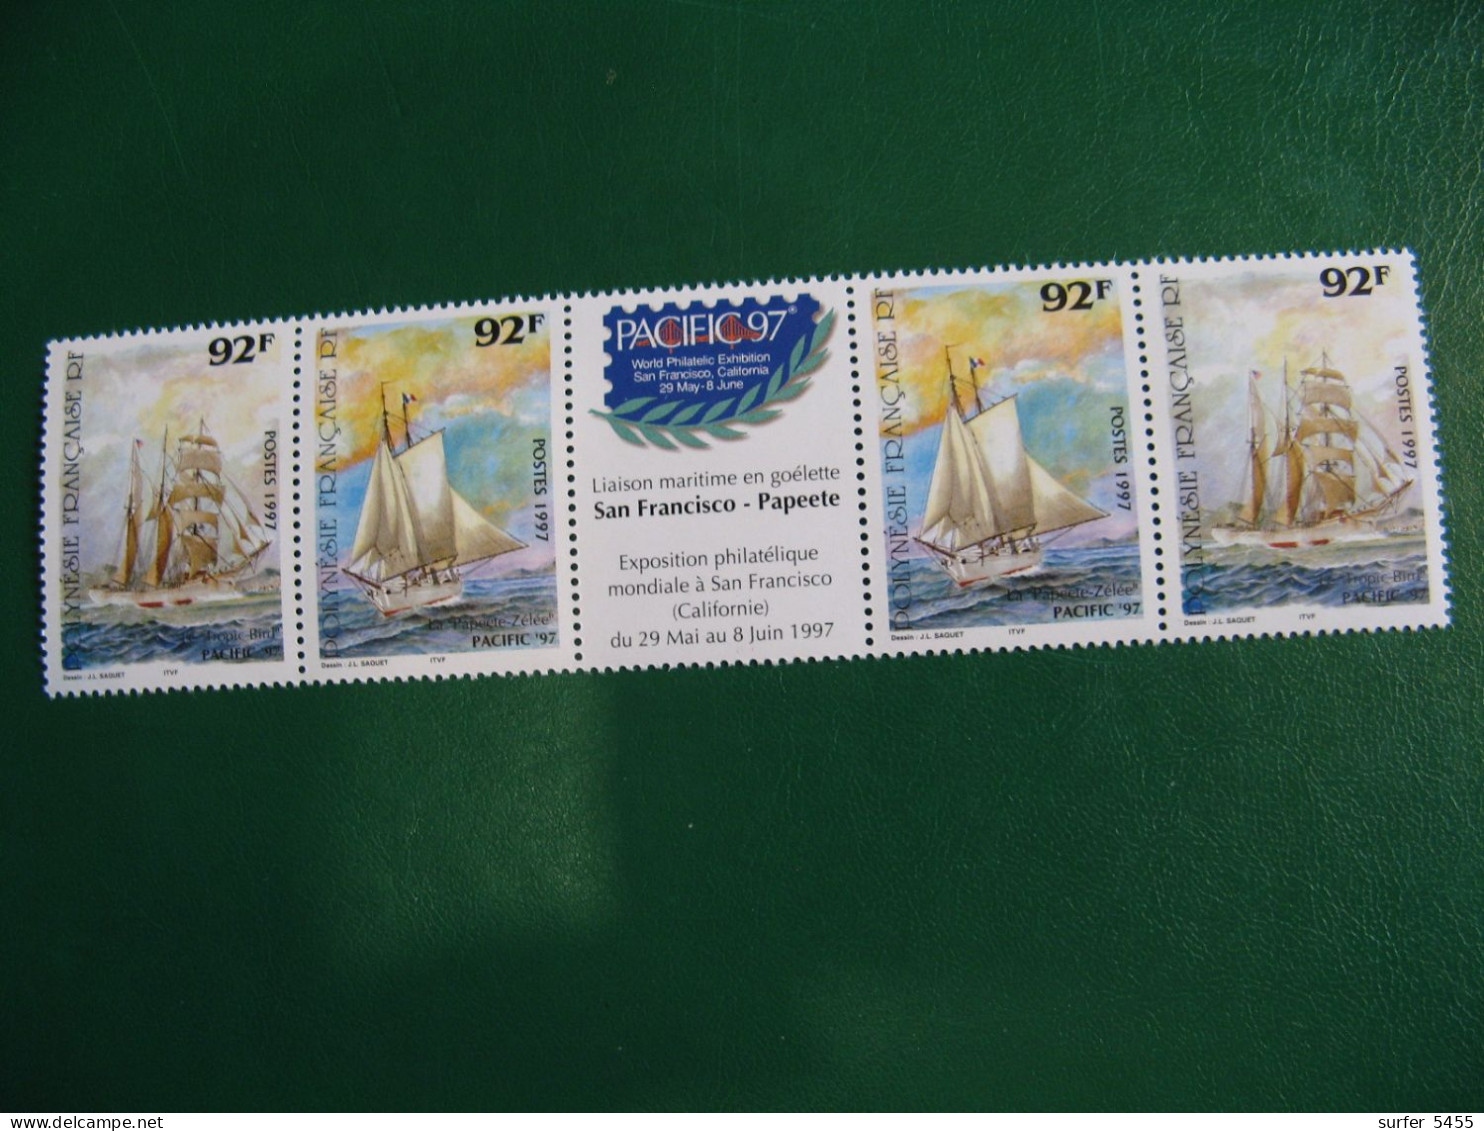 P0LYNESIE PO ORDINAIRE N° 531/532 BANDE DE 2 EX TIMBRES NEUFS ** LUXE - MNH - SERIES COMPLETES - COTE 10,80 EUROS - Unused Stamps